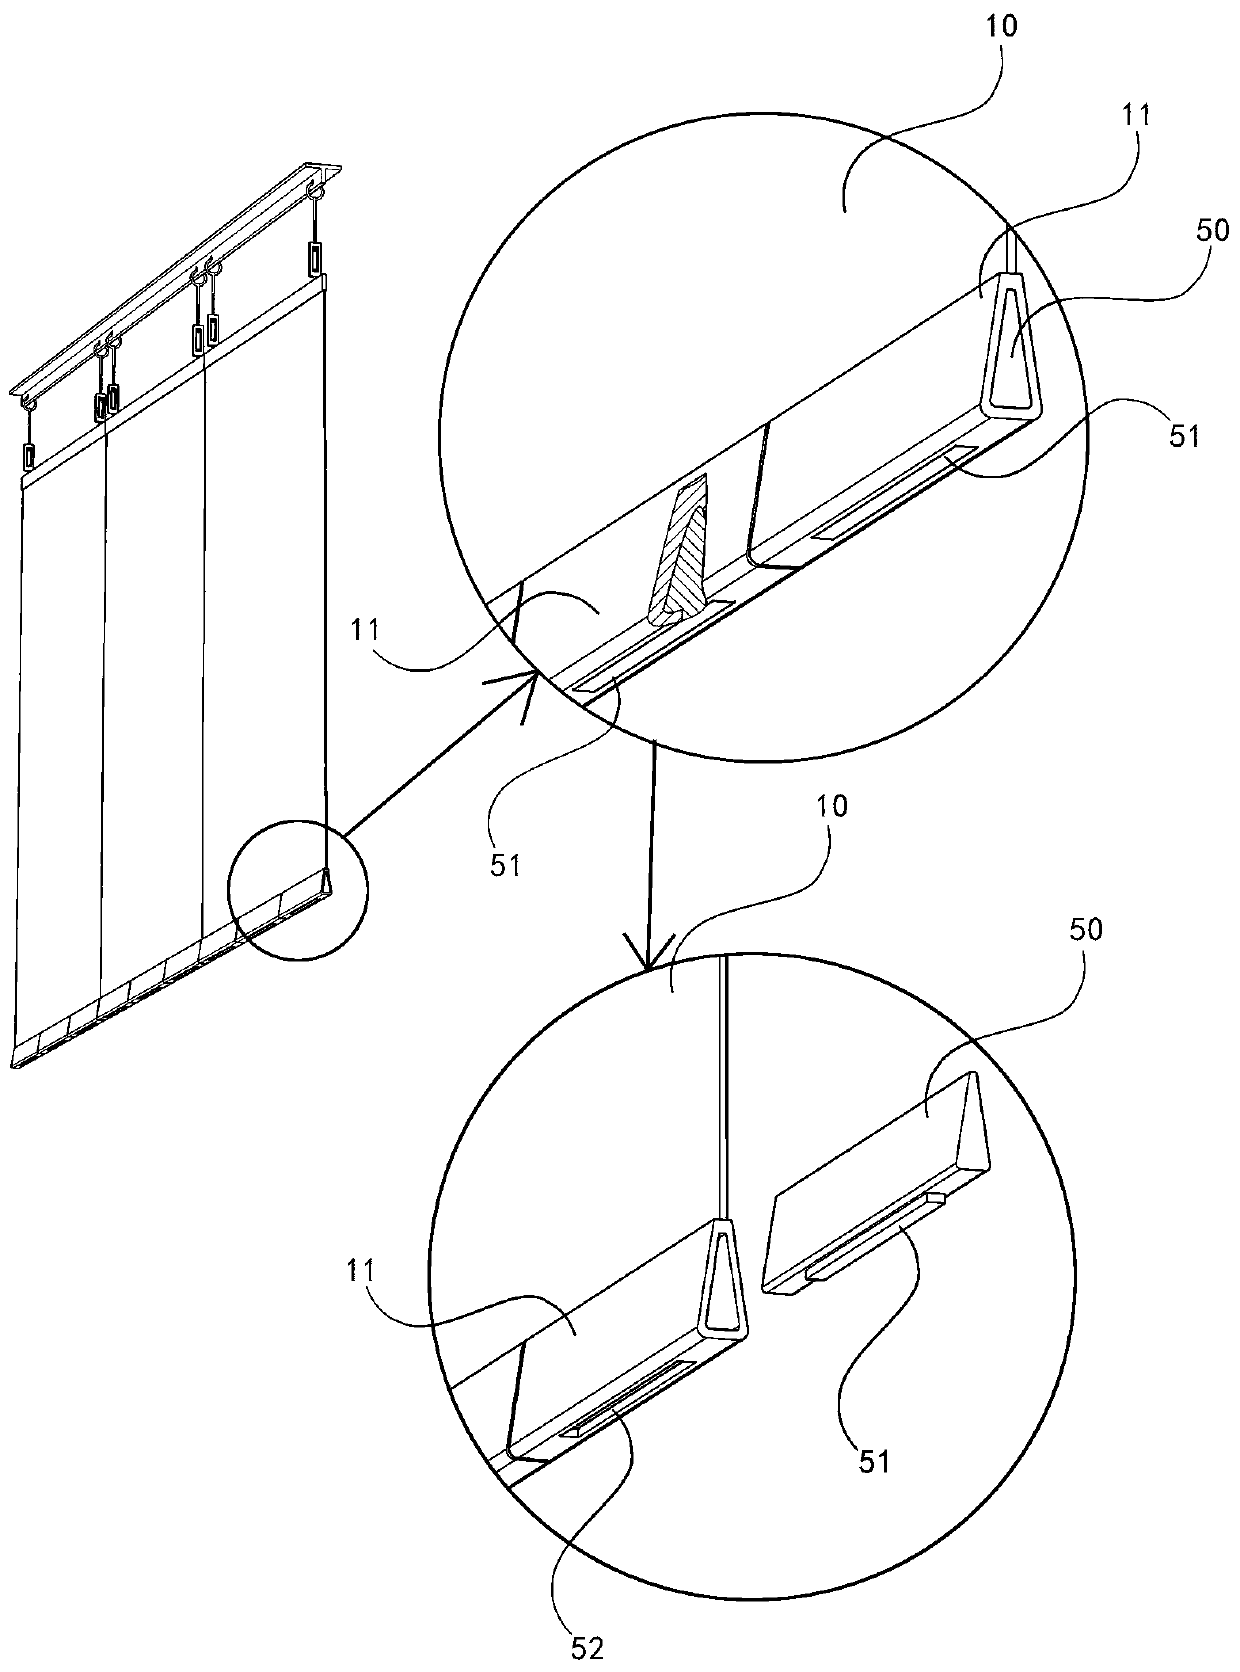 Energy saving curtain capable of preventing cold air from communicating quickly at bottom of door opening